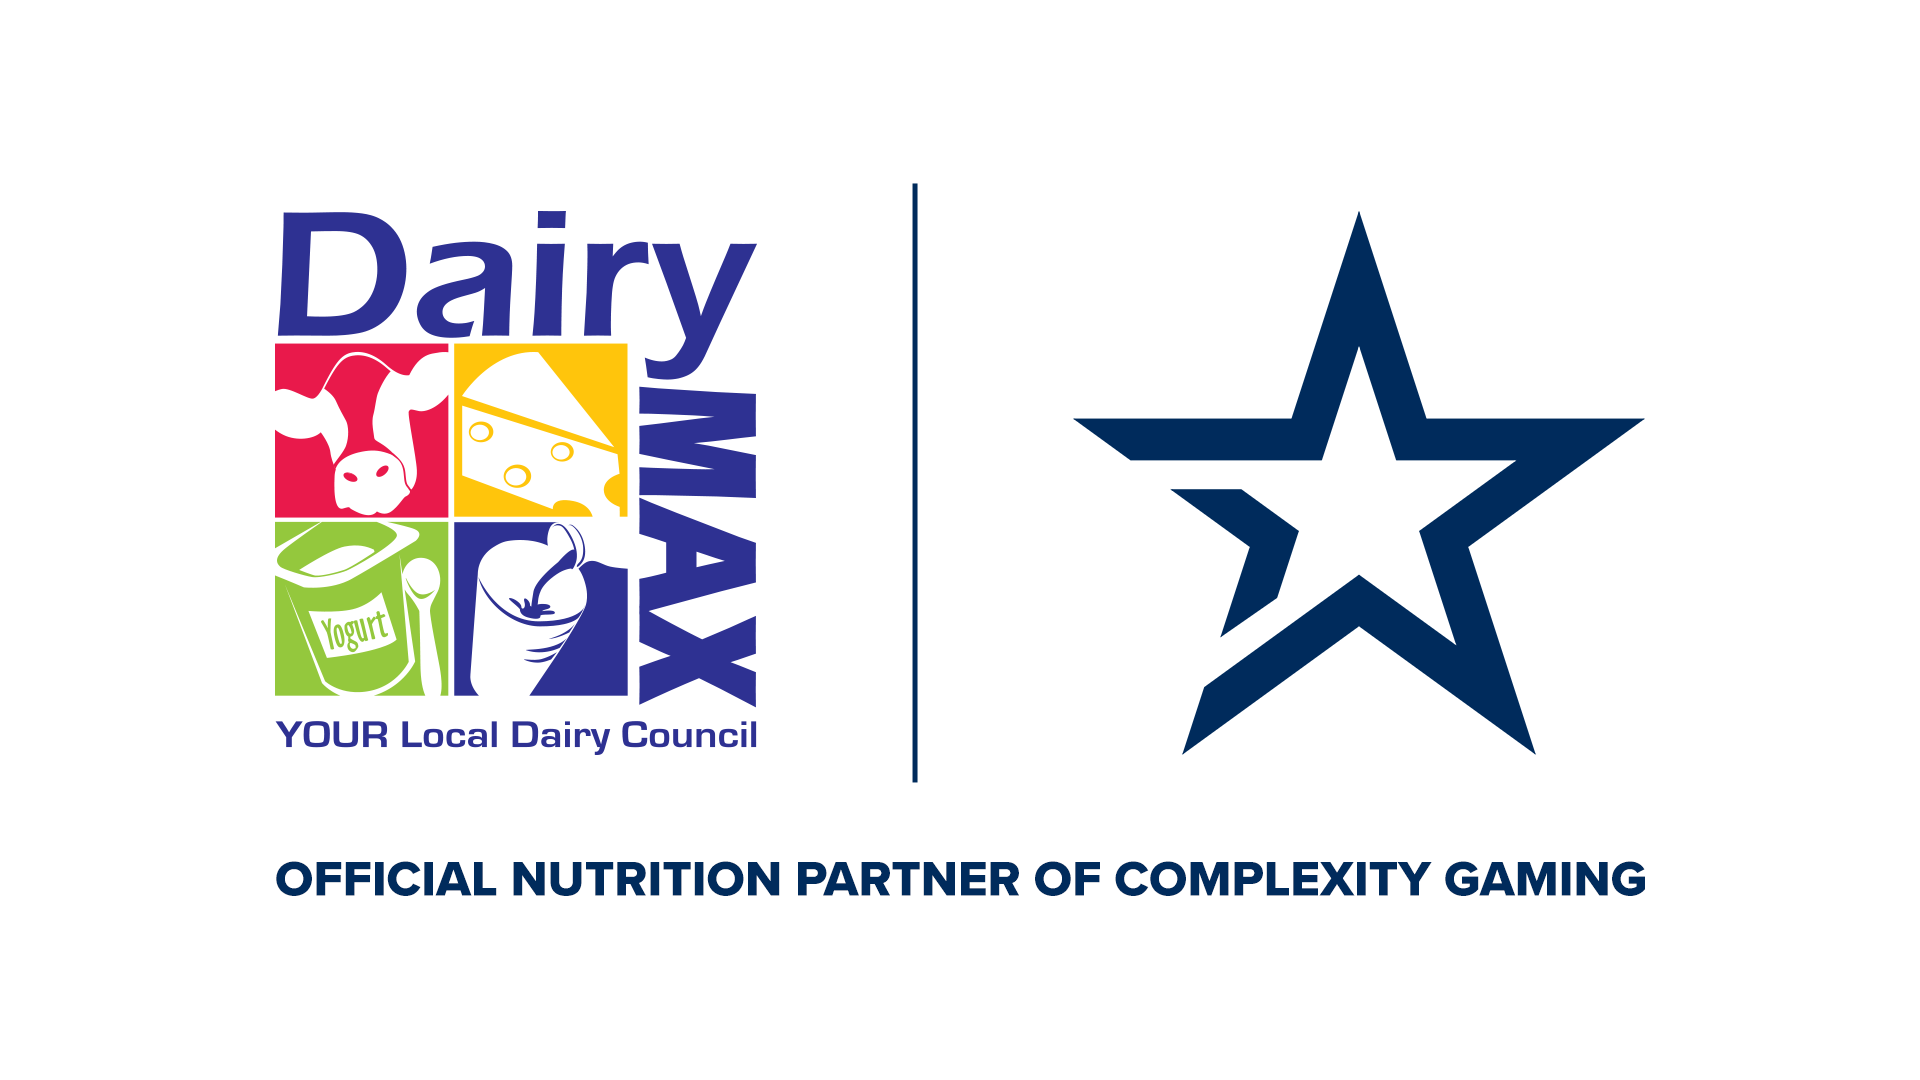 Dairy MAX Named as an Official Nutrition Partner for OpTic Gaming